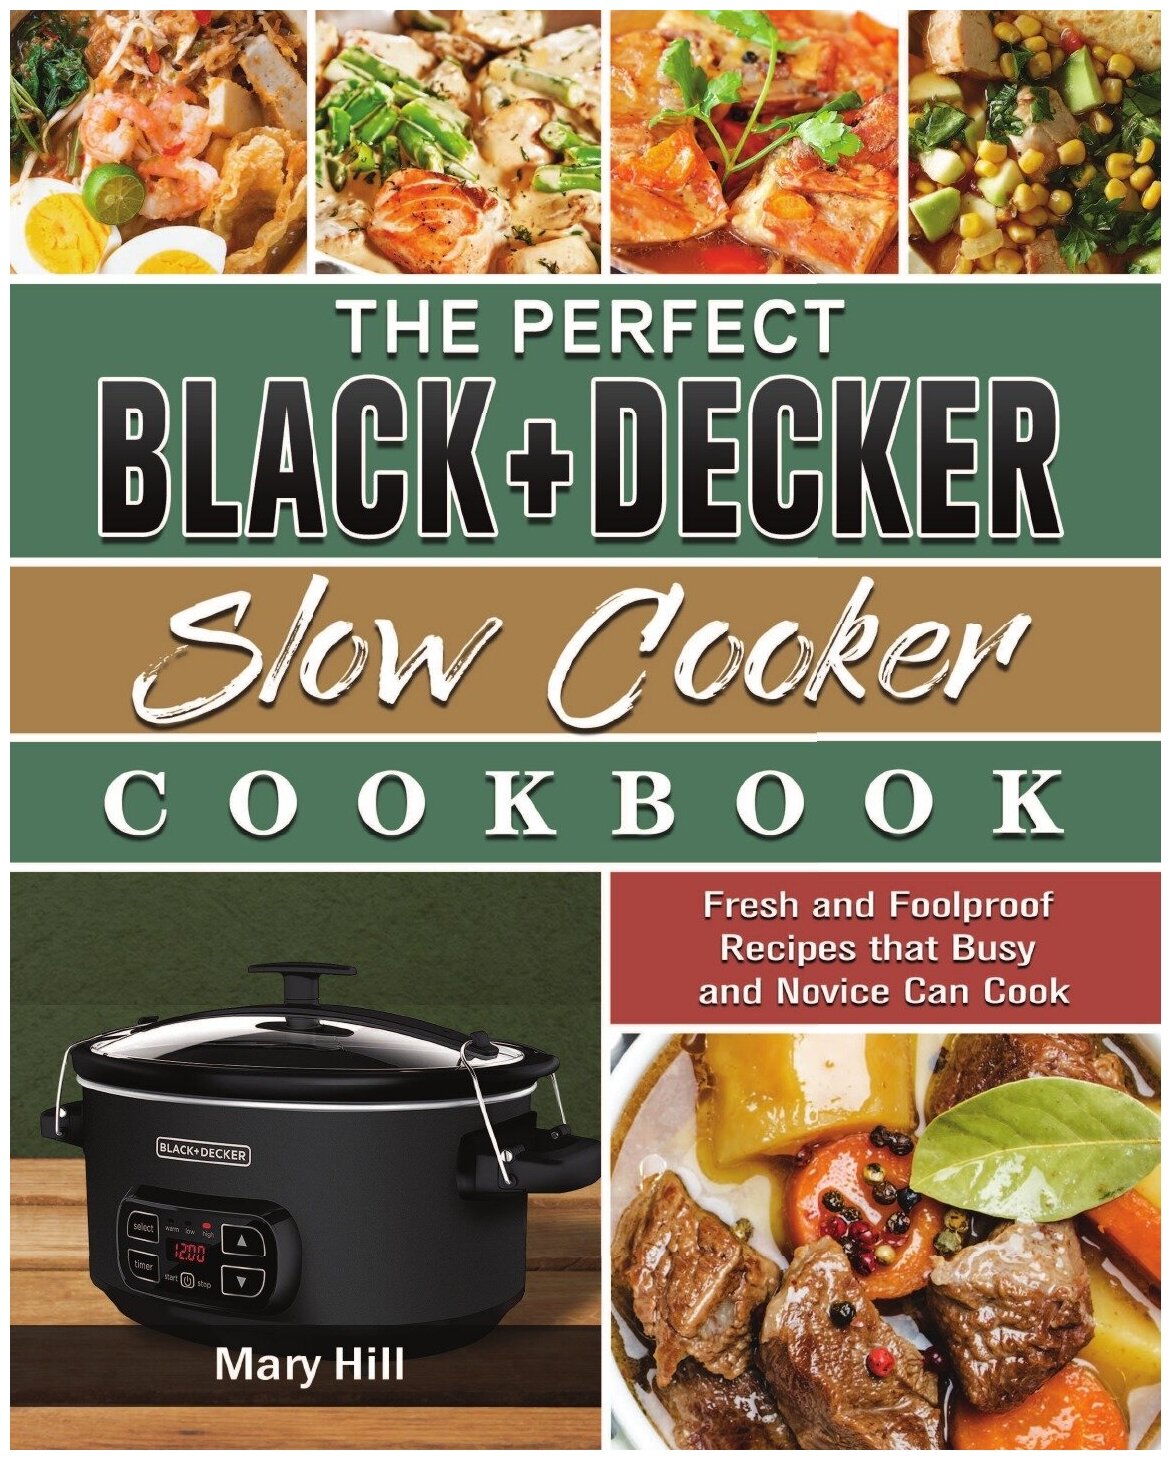 The Perfect BLACK+DECKER Slow Cooker Cookbook. Fresh and Foolproof Recipes that Busy and Novice Can Cook